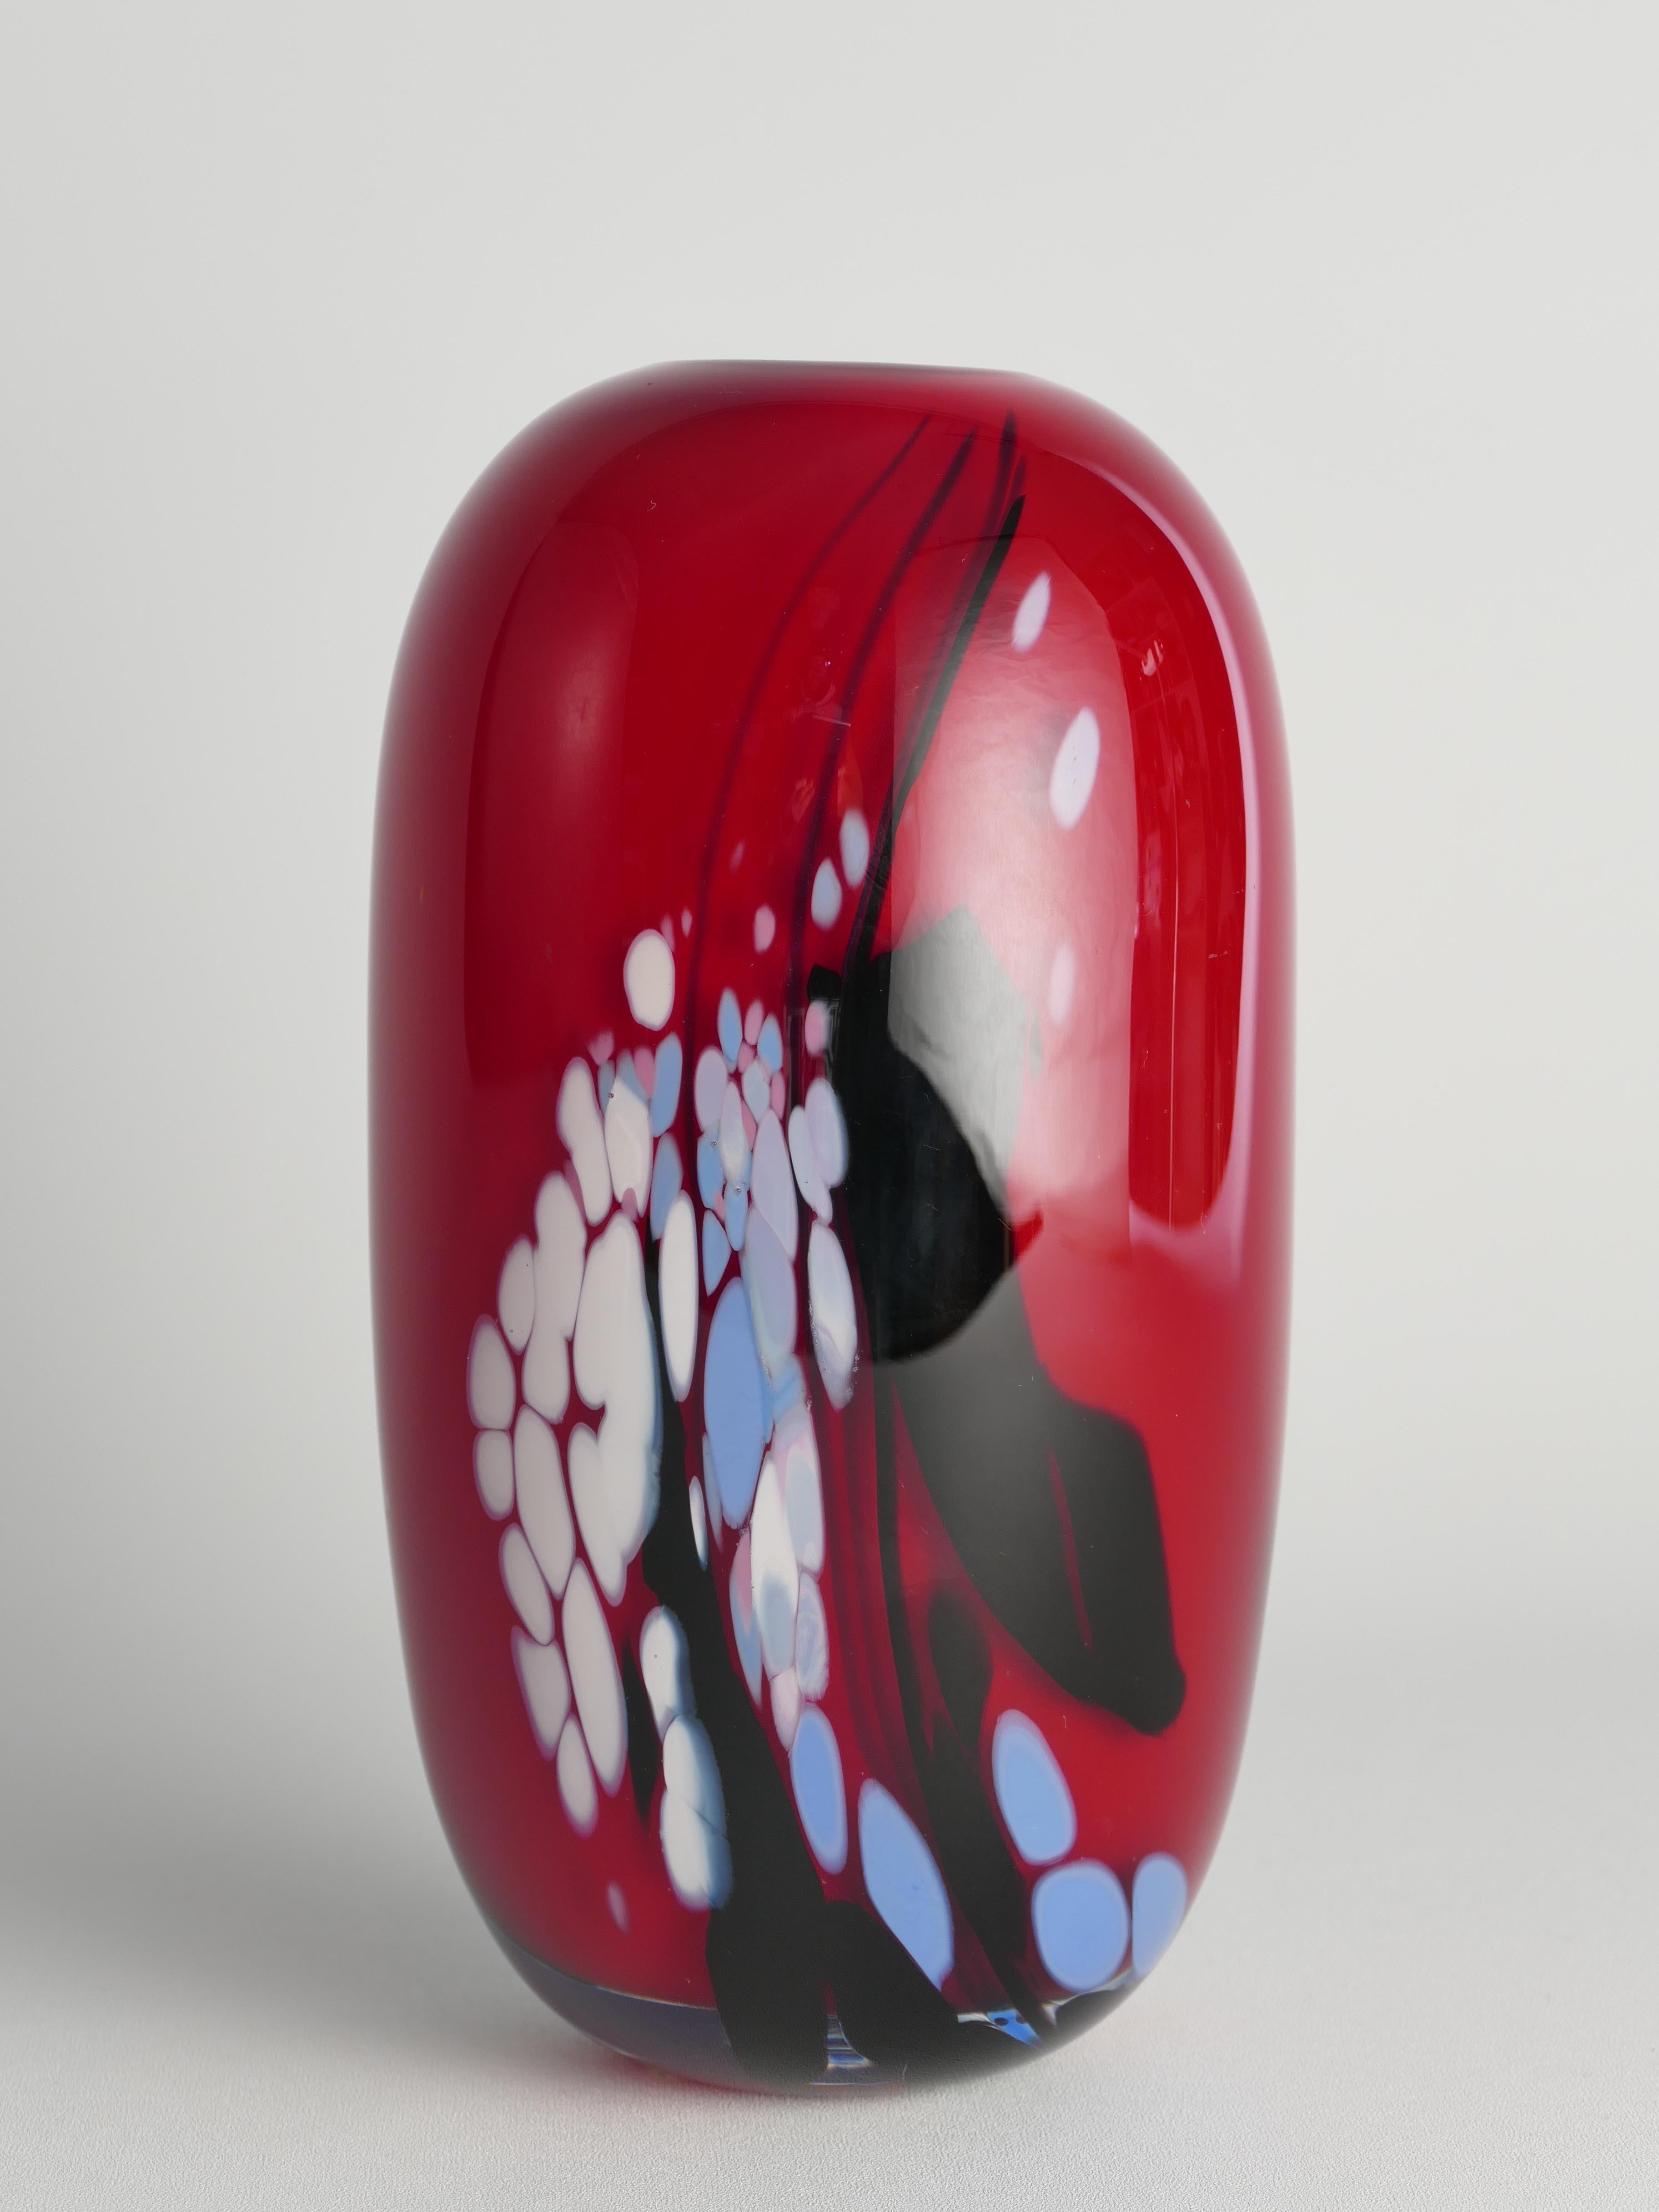 Post-Modern Unique Cherry Red Art Glass Vase by Mikael Axenbrant, Sweden 1990 For Sale